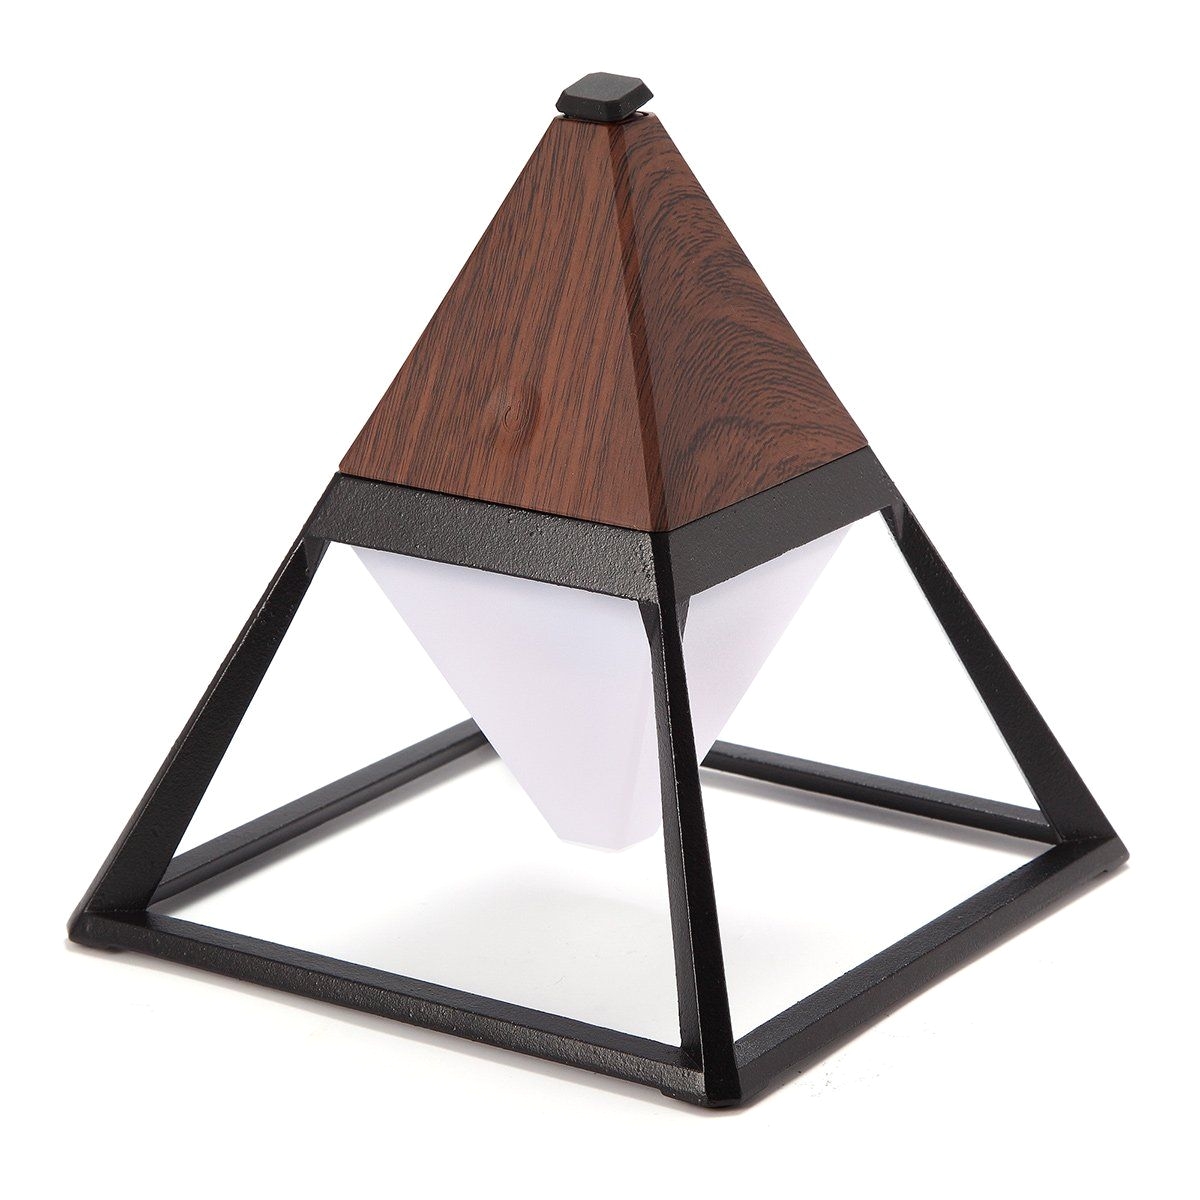 jeteven pyramid led desk lamp eye care table reading light 3 mode touch control ip63